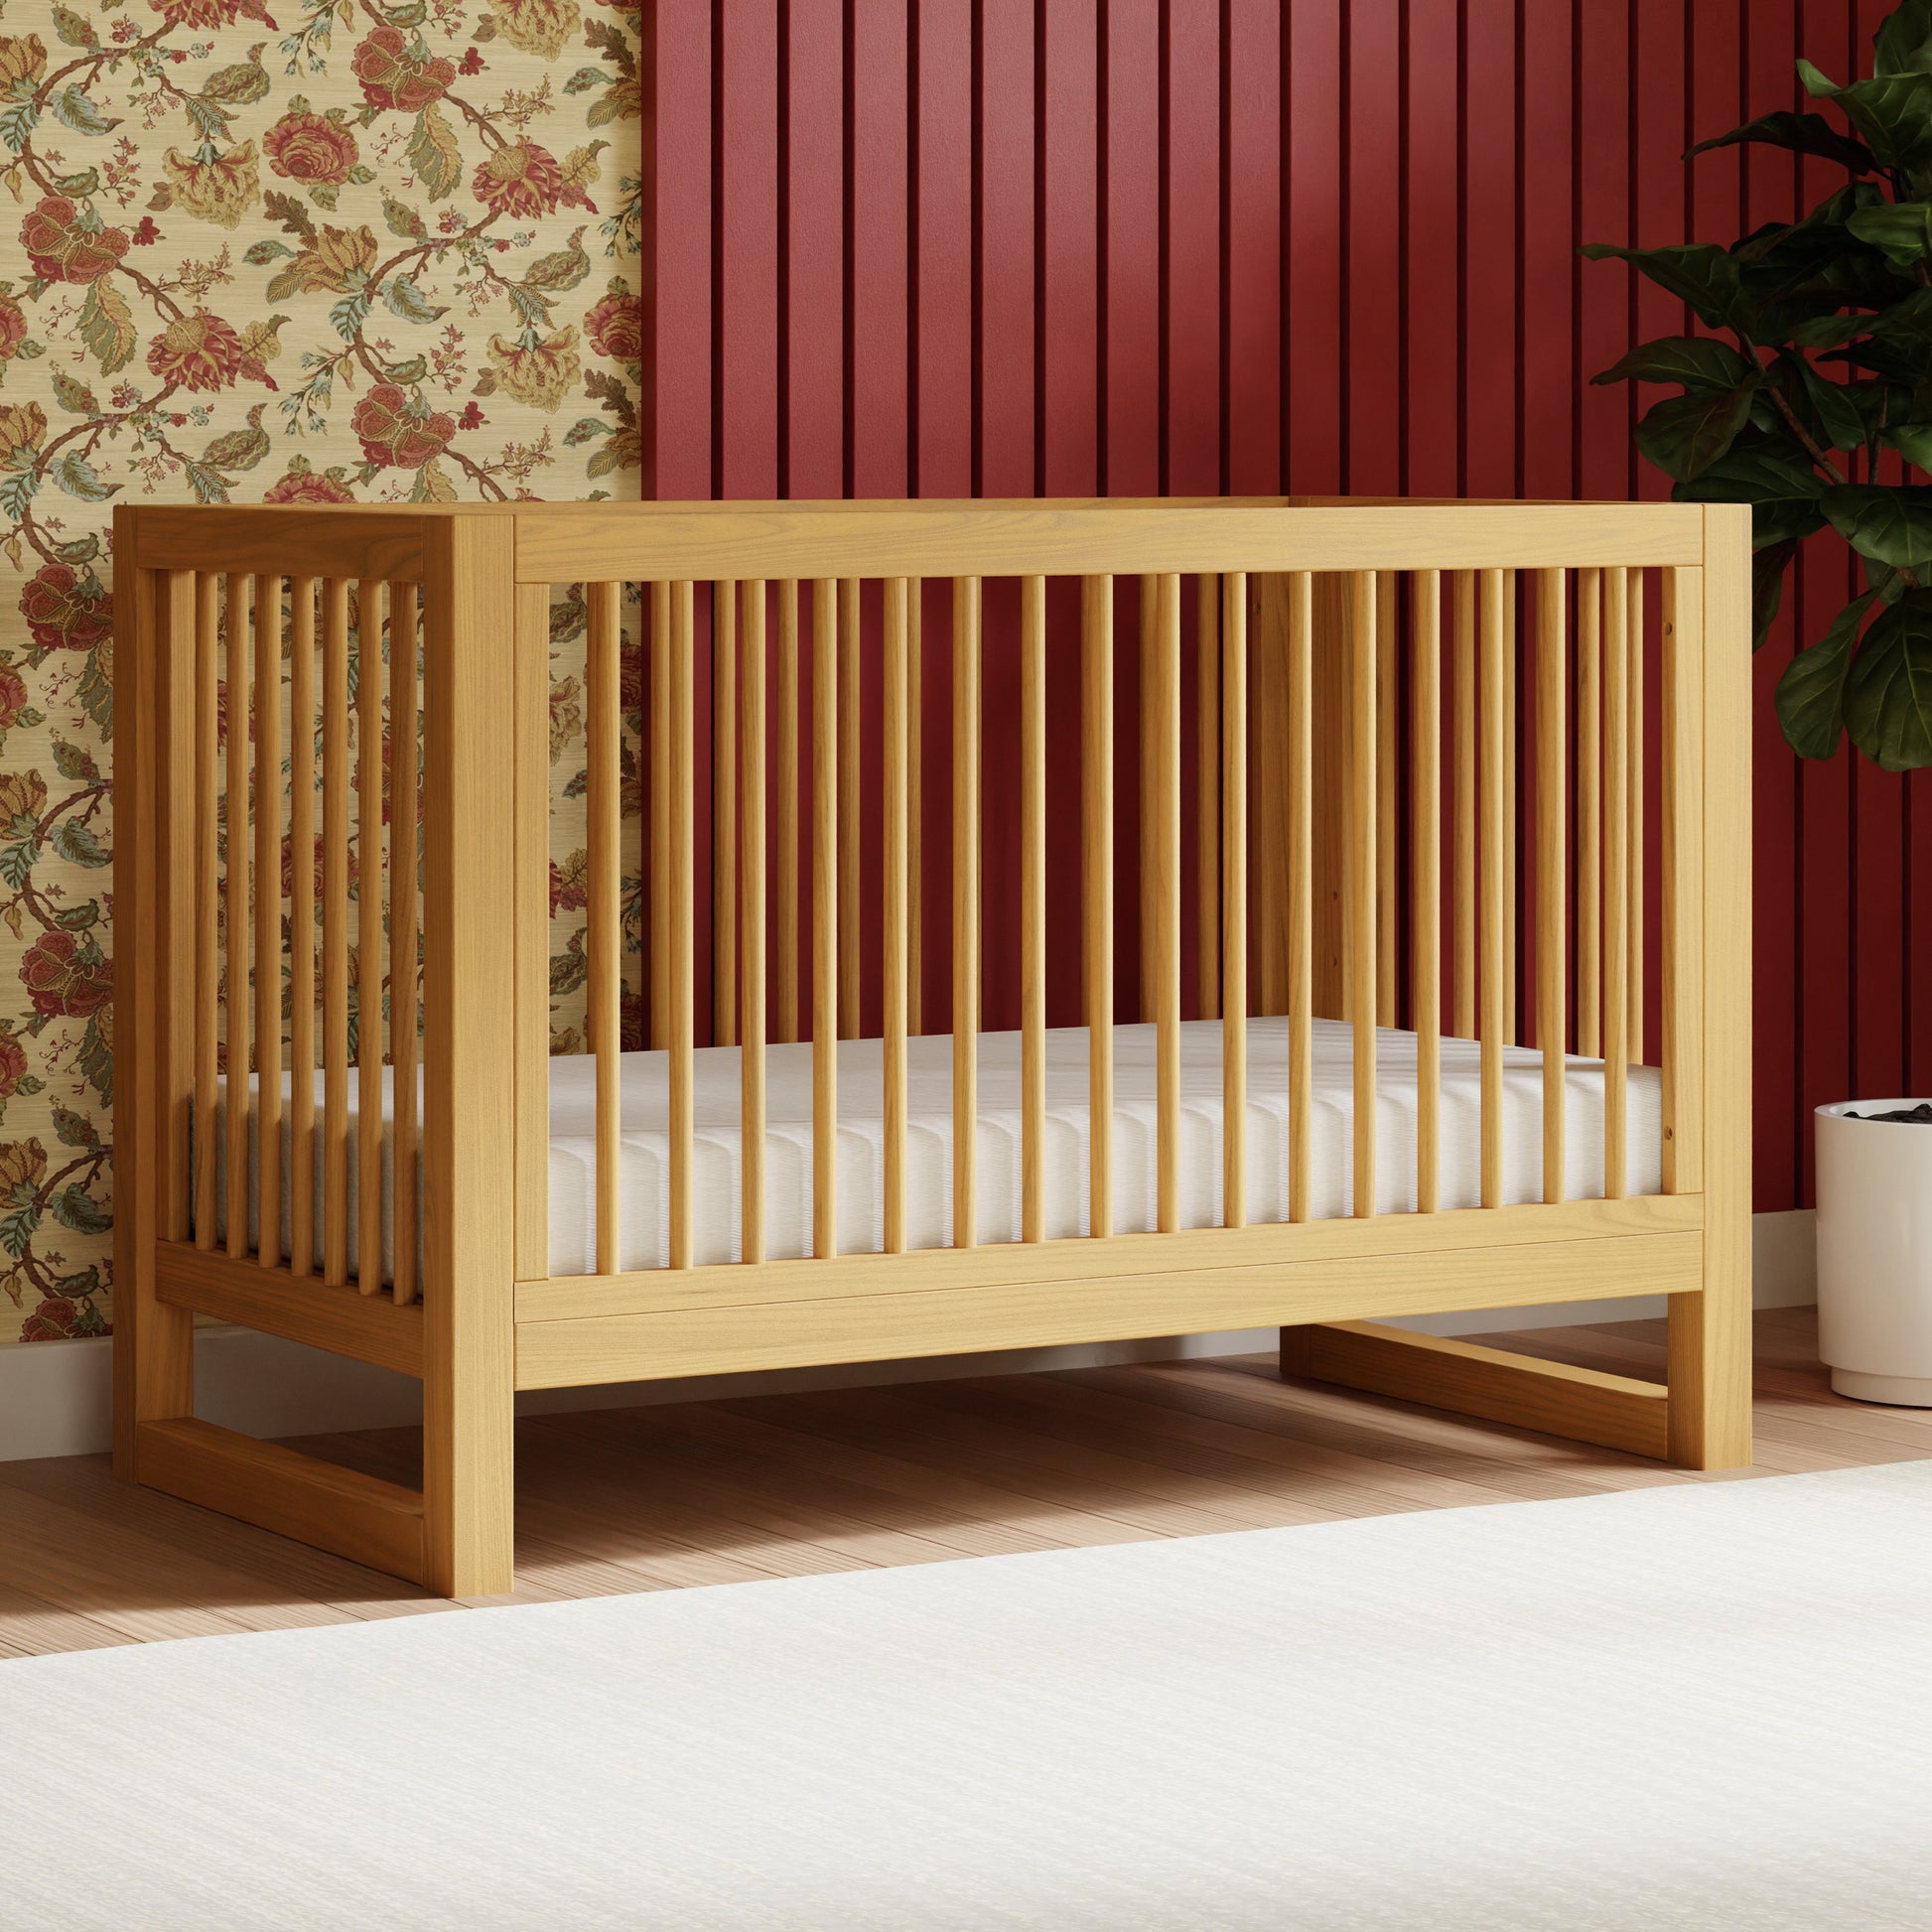 M23301HY,Nantucket 3-in-1 Convertible Crib w/Toddler Bed Conversion Kit in Honey